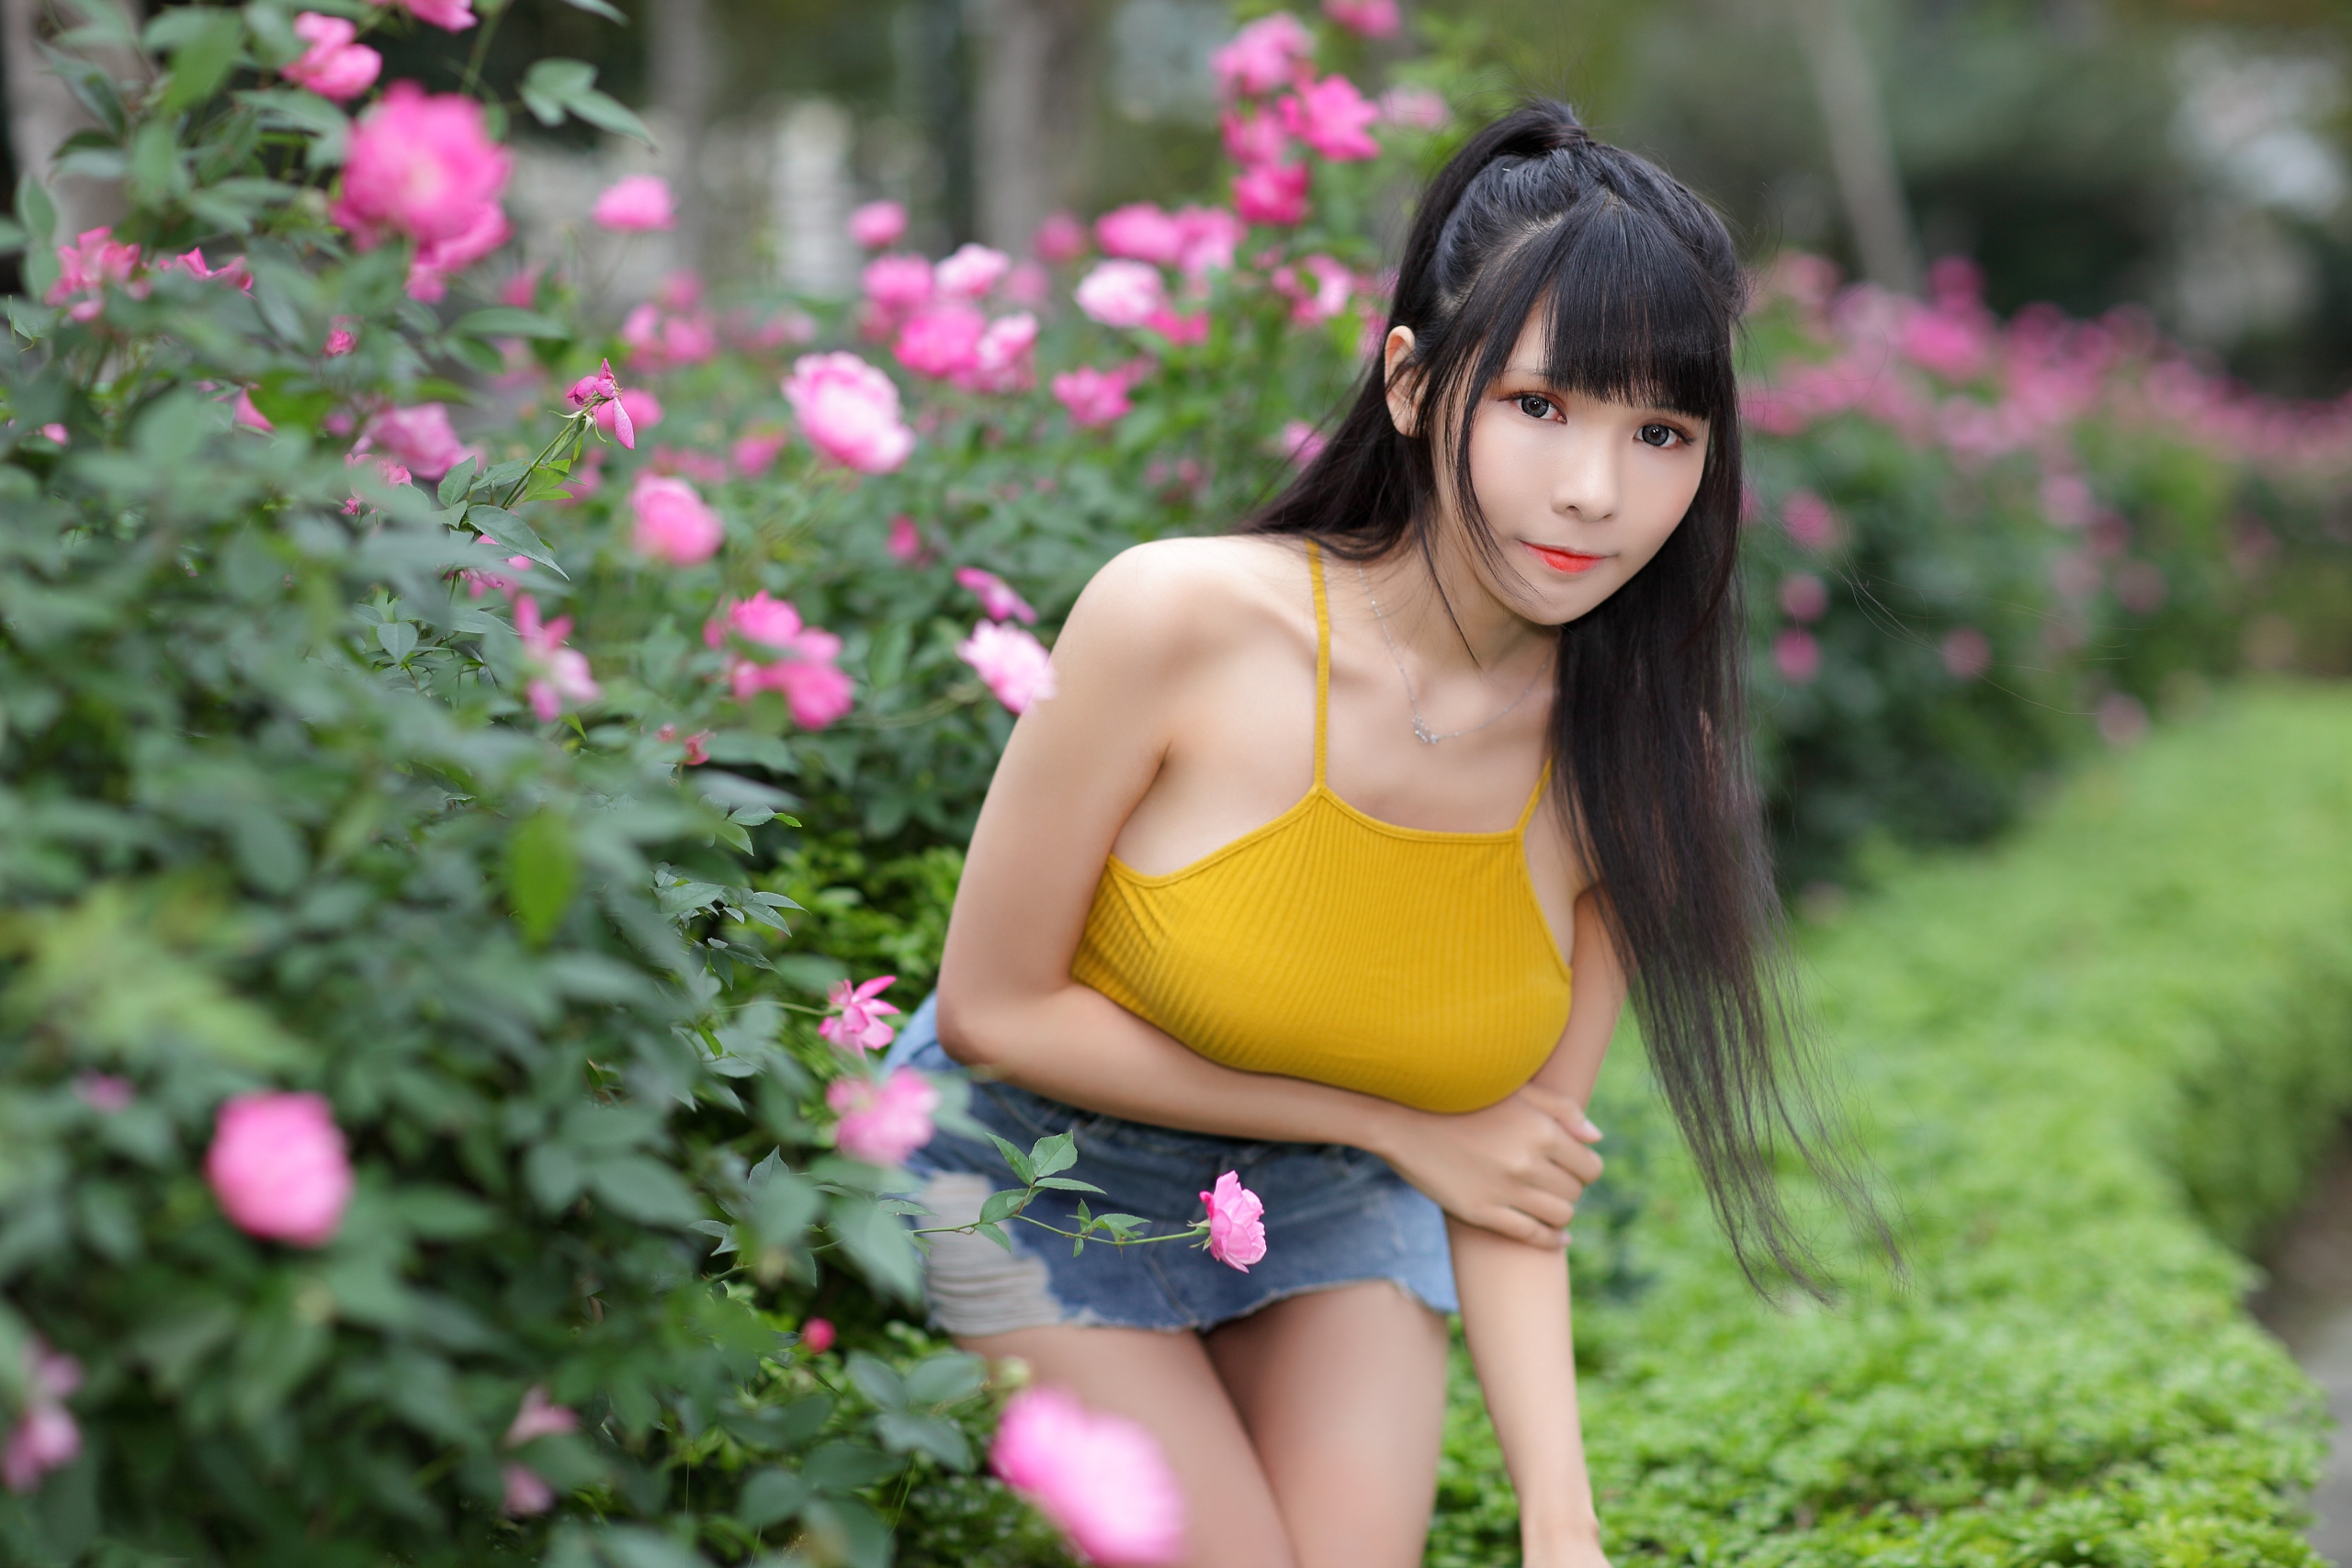 Vicky Women Model Brunette Asian Ponytail Looking At Viewer Necklace Yellow Tops Bushes Flowers Dept 2560x1707